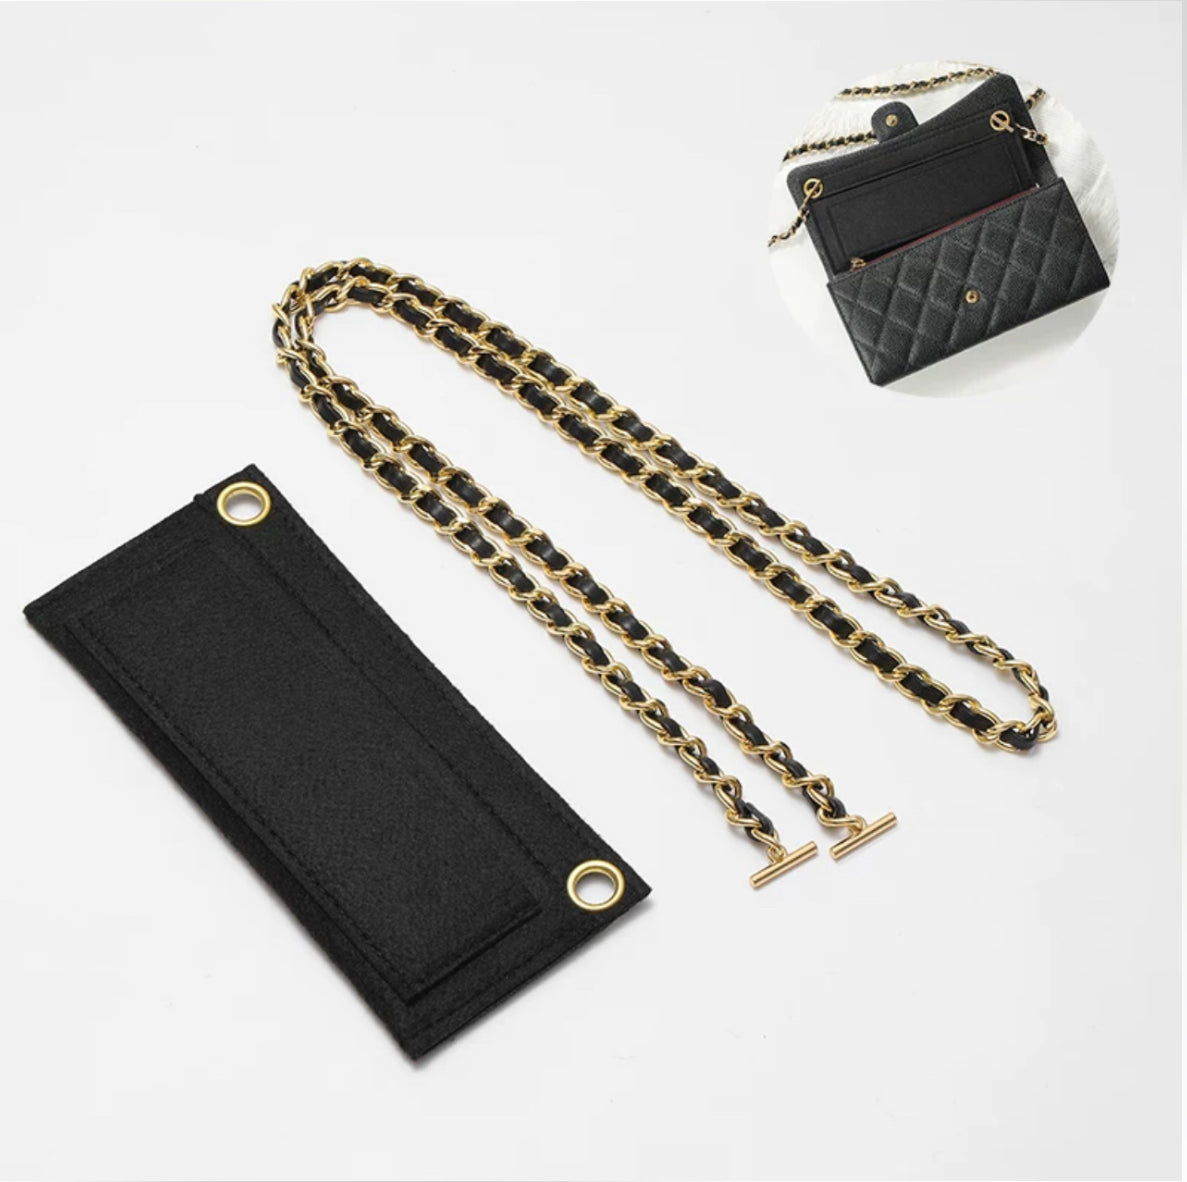 CHANEL, Bags, Chanel Classic Long Zipped Wallet Purse Seperate